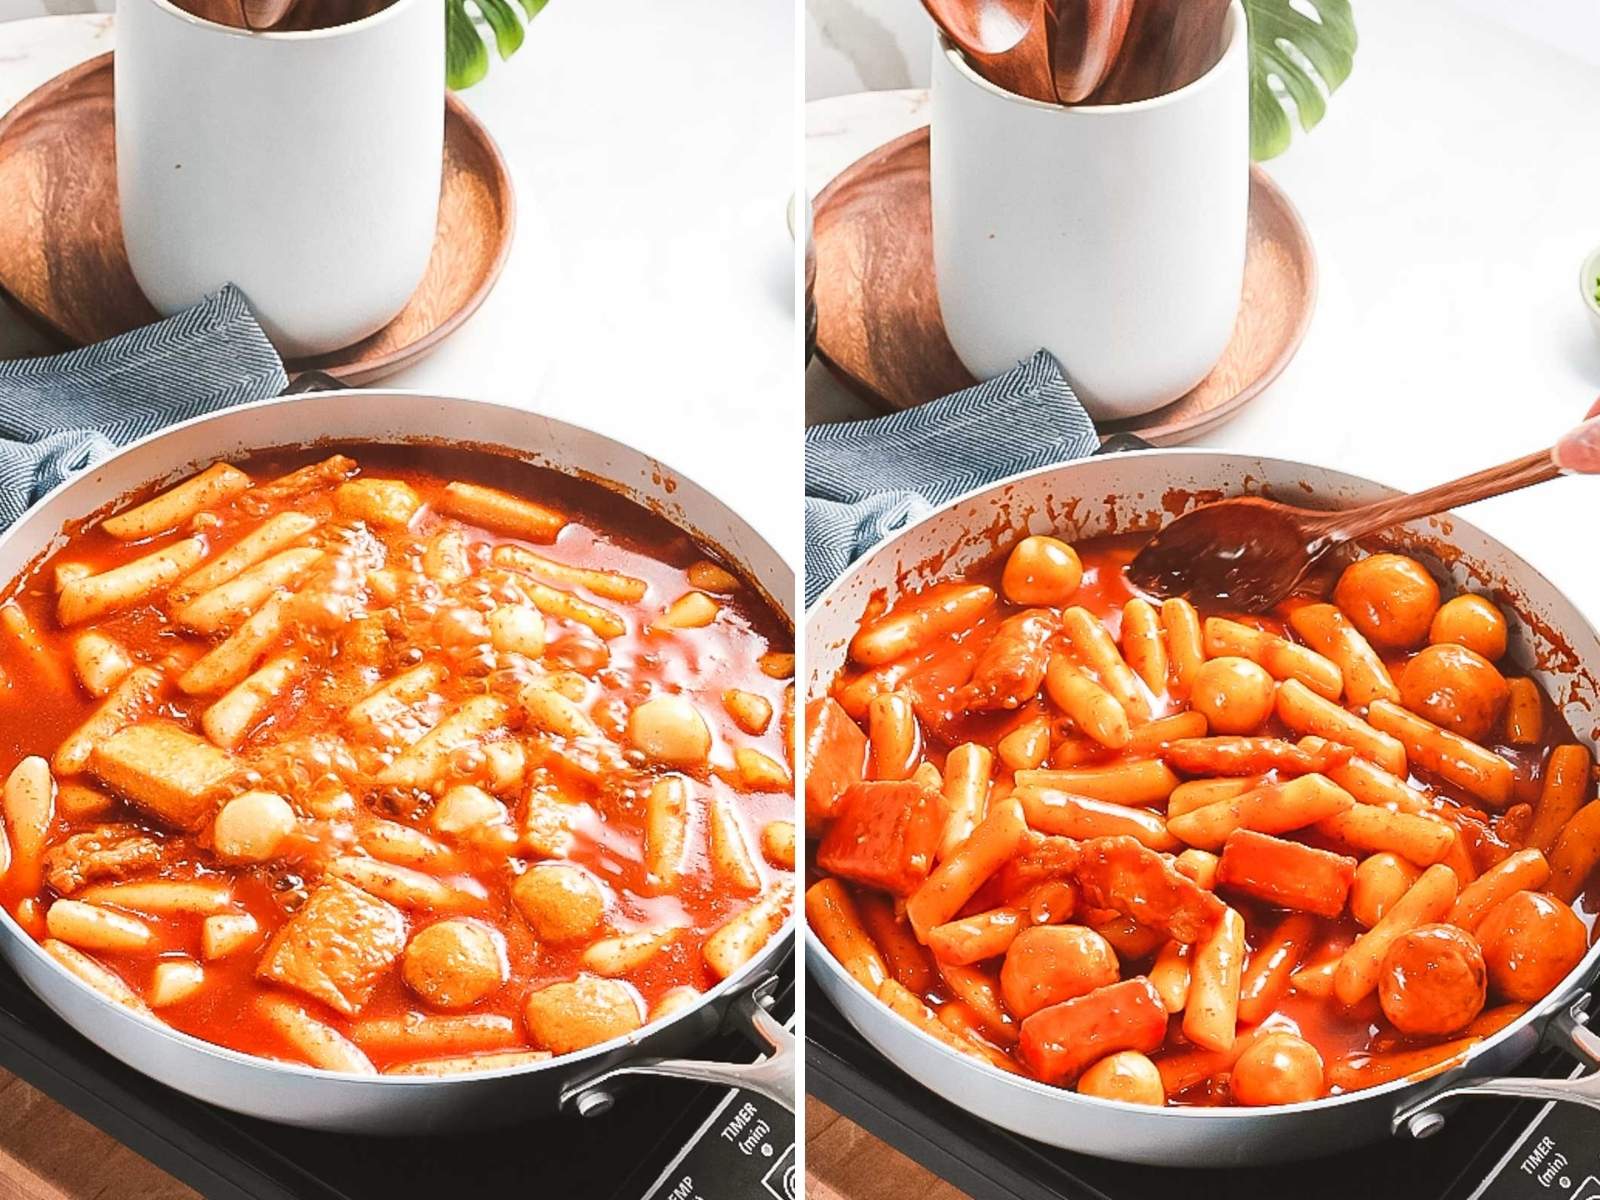 Tteokbokki boiling in a large pan with rice cakes and red gochujang sauce.